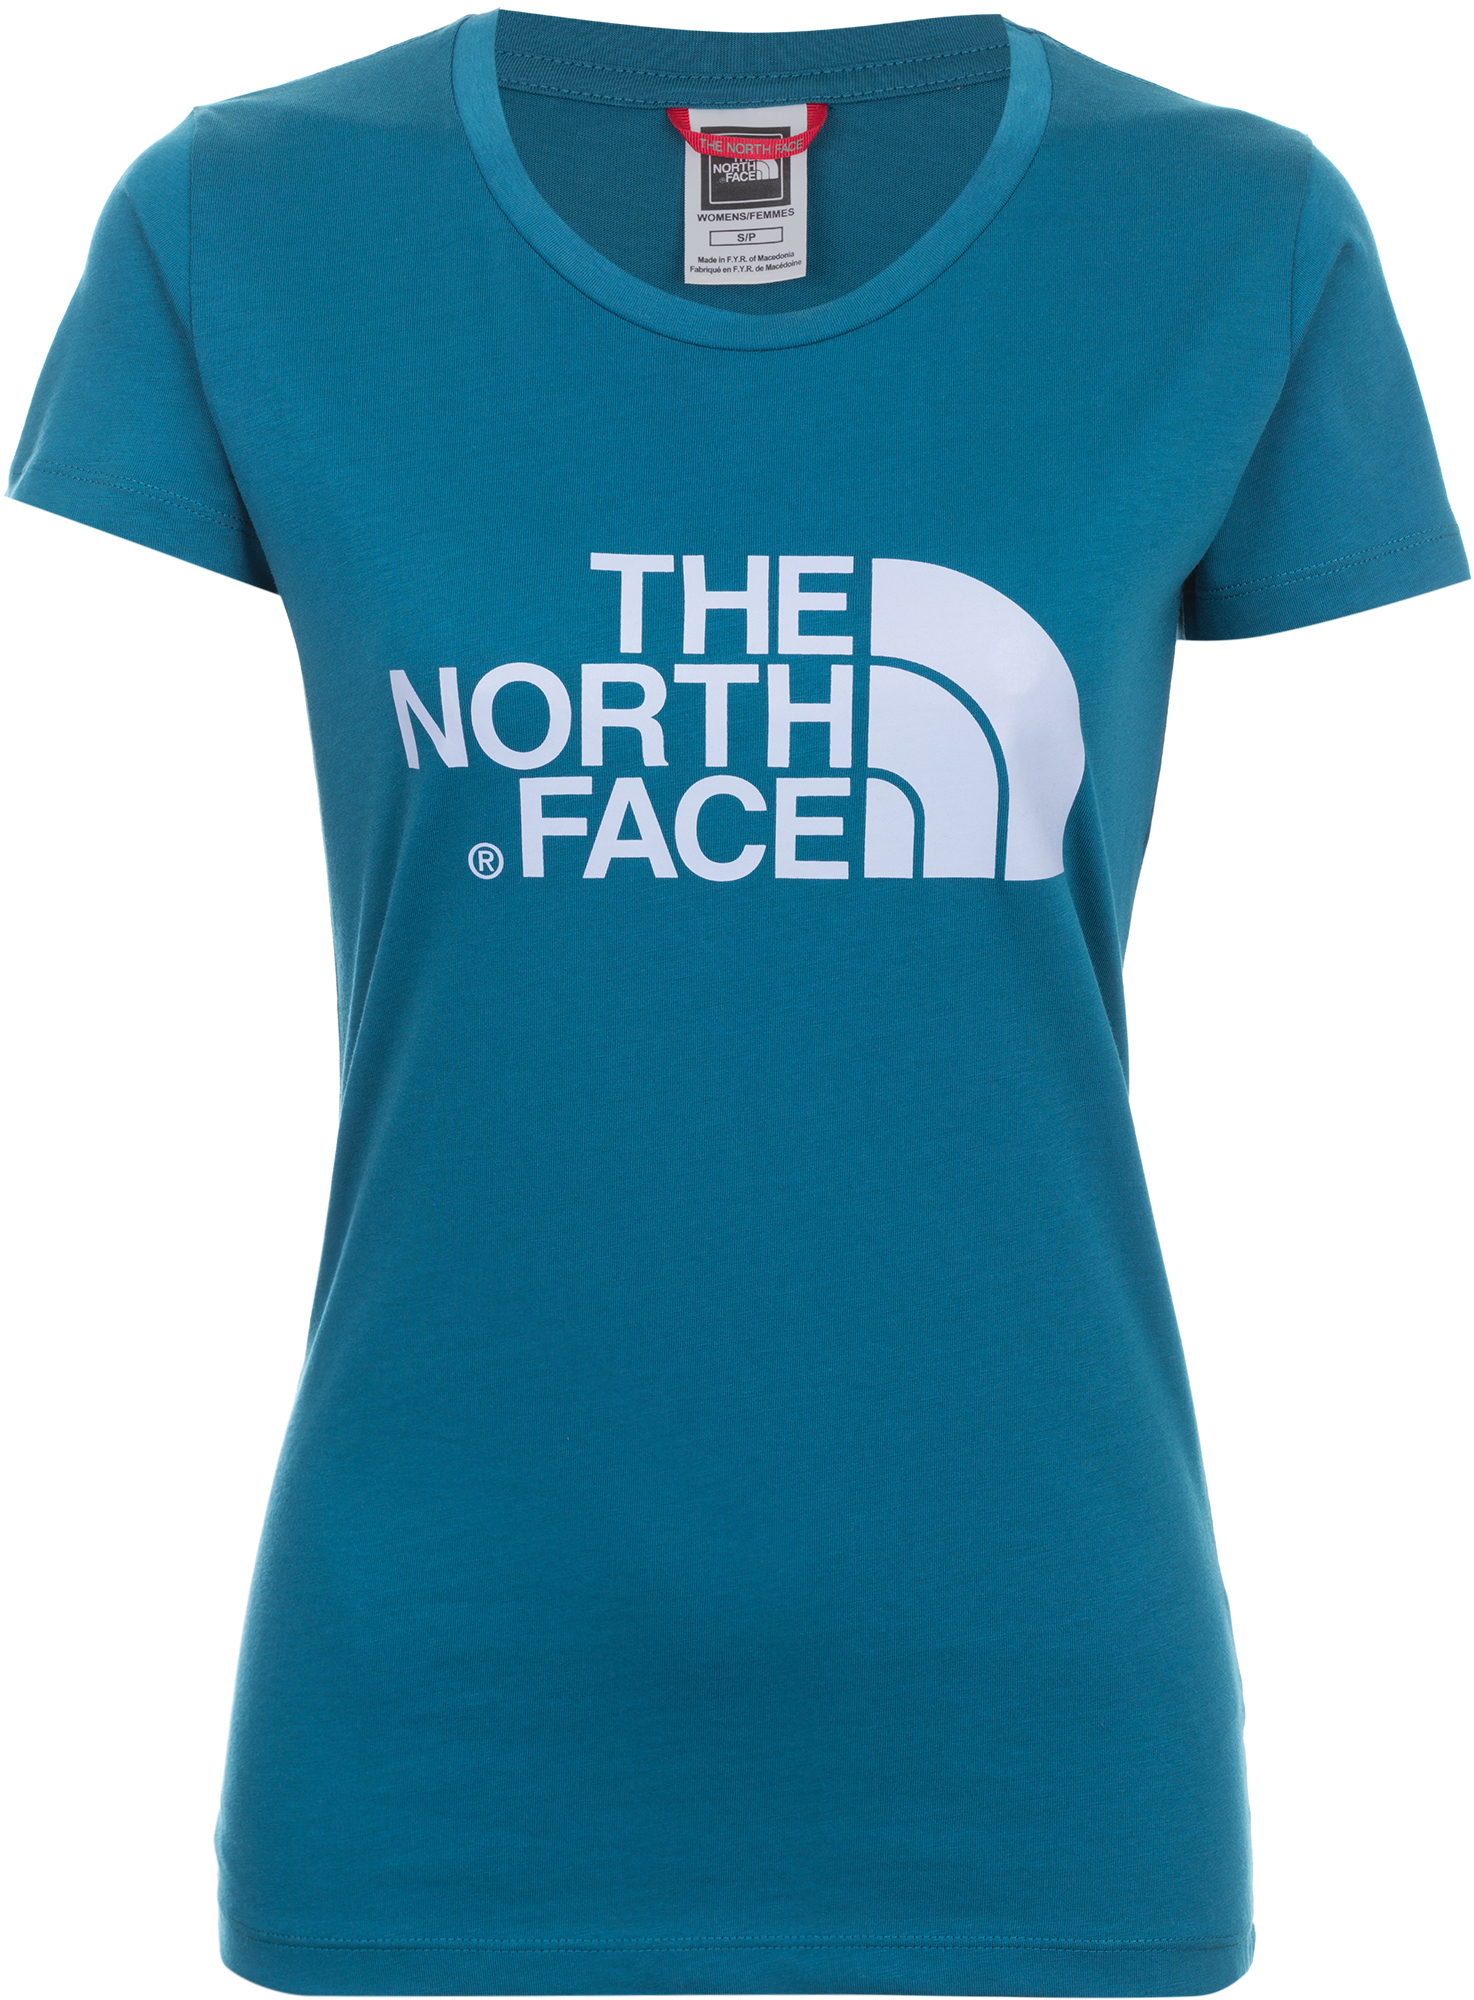 The North Face Футболка женская The North Face Easy, размер 46